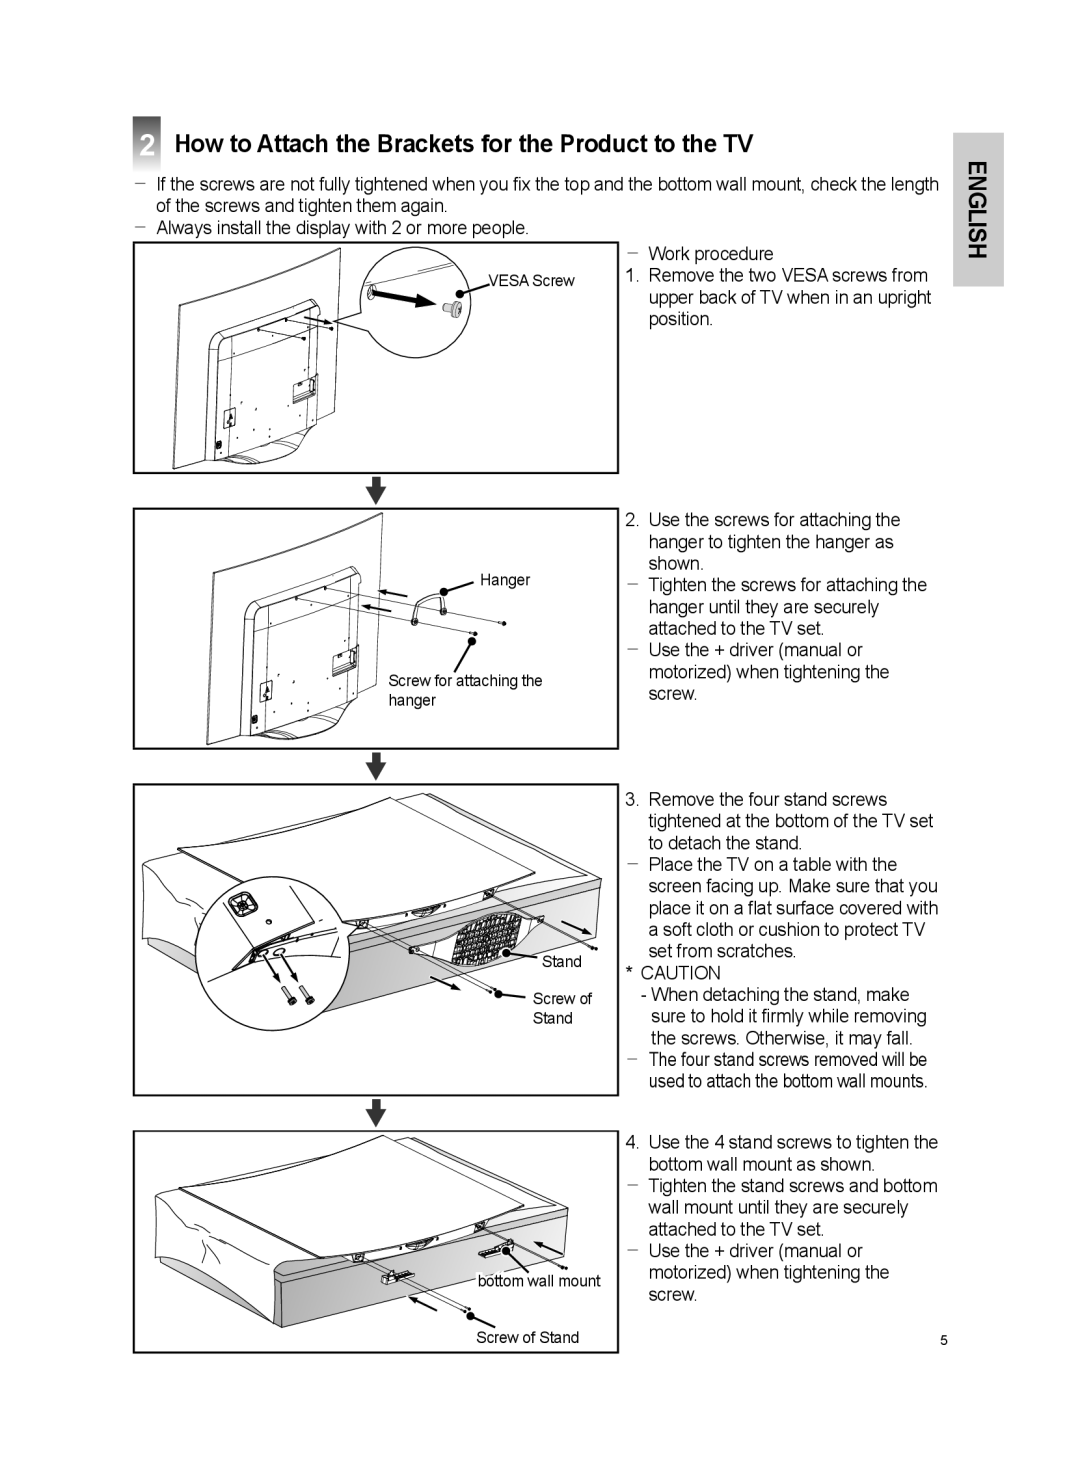 LG Electronics OSW100 install manual How to Attach the Brackets for the Product to the TV, English 